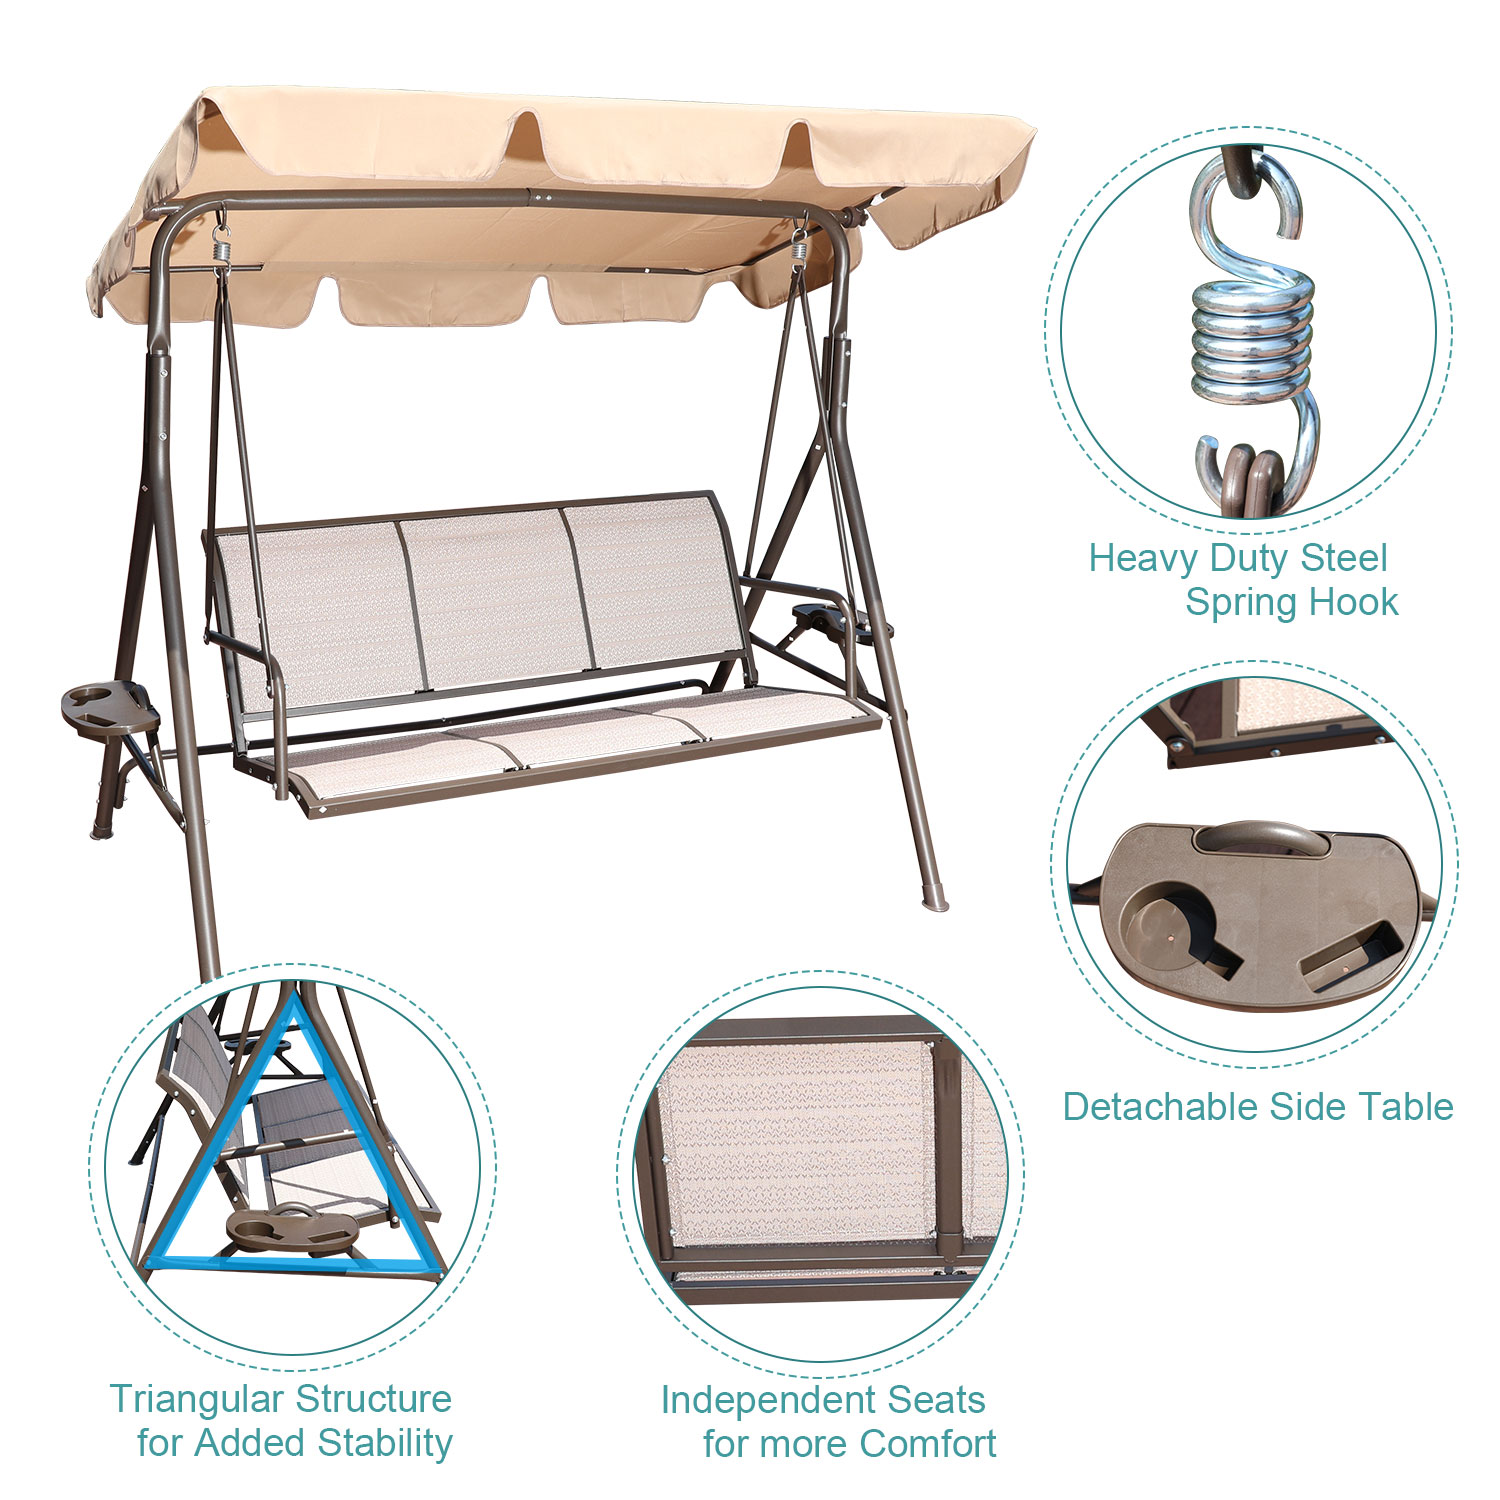 3 Person Beige Patio Swing Seat with Adjustable Canopy, All Weather Resistant Hammock Swinging Chair Bench - image 3 of 11